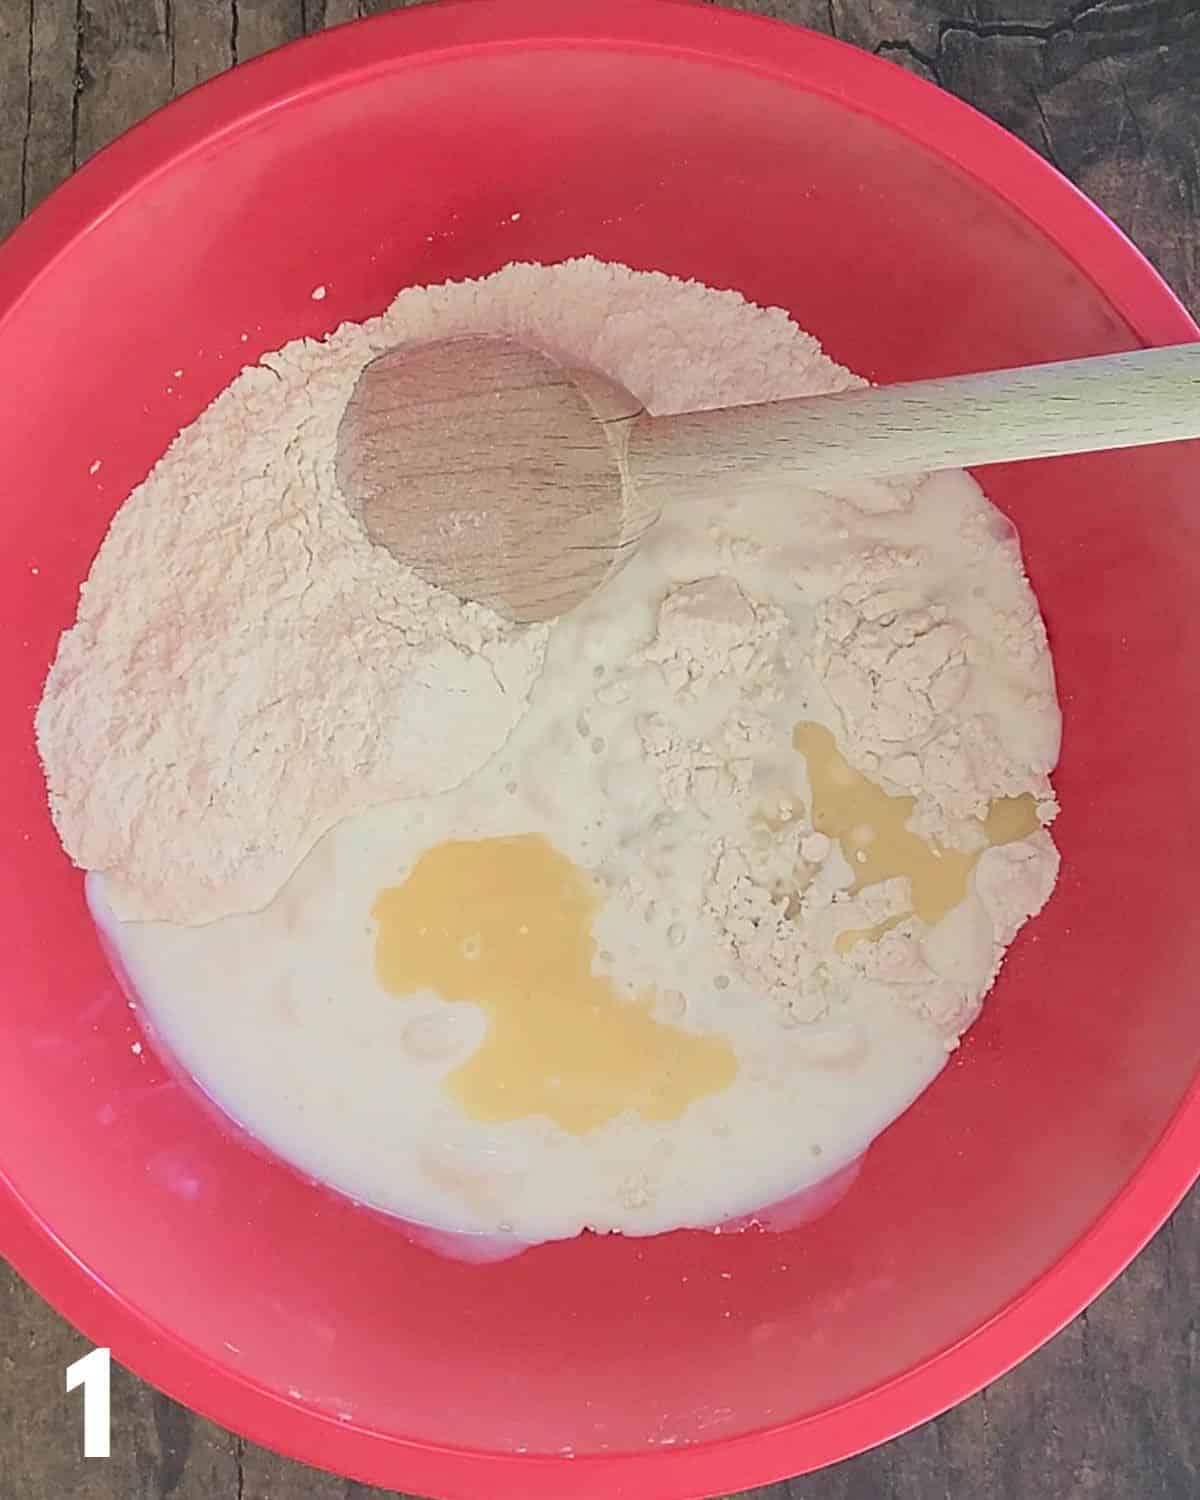 Flour, butter, and buttermilk in a red mixing bowl. 